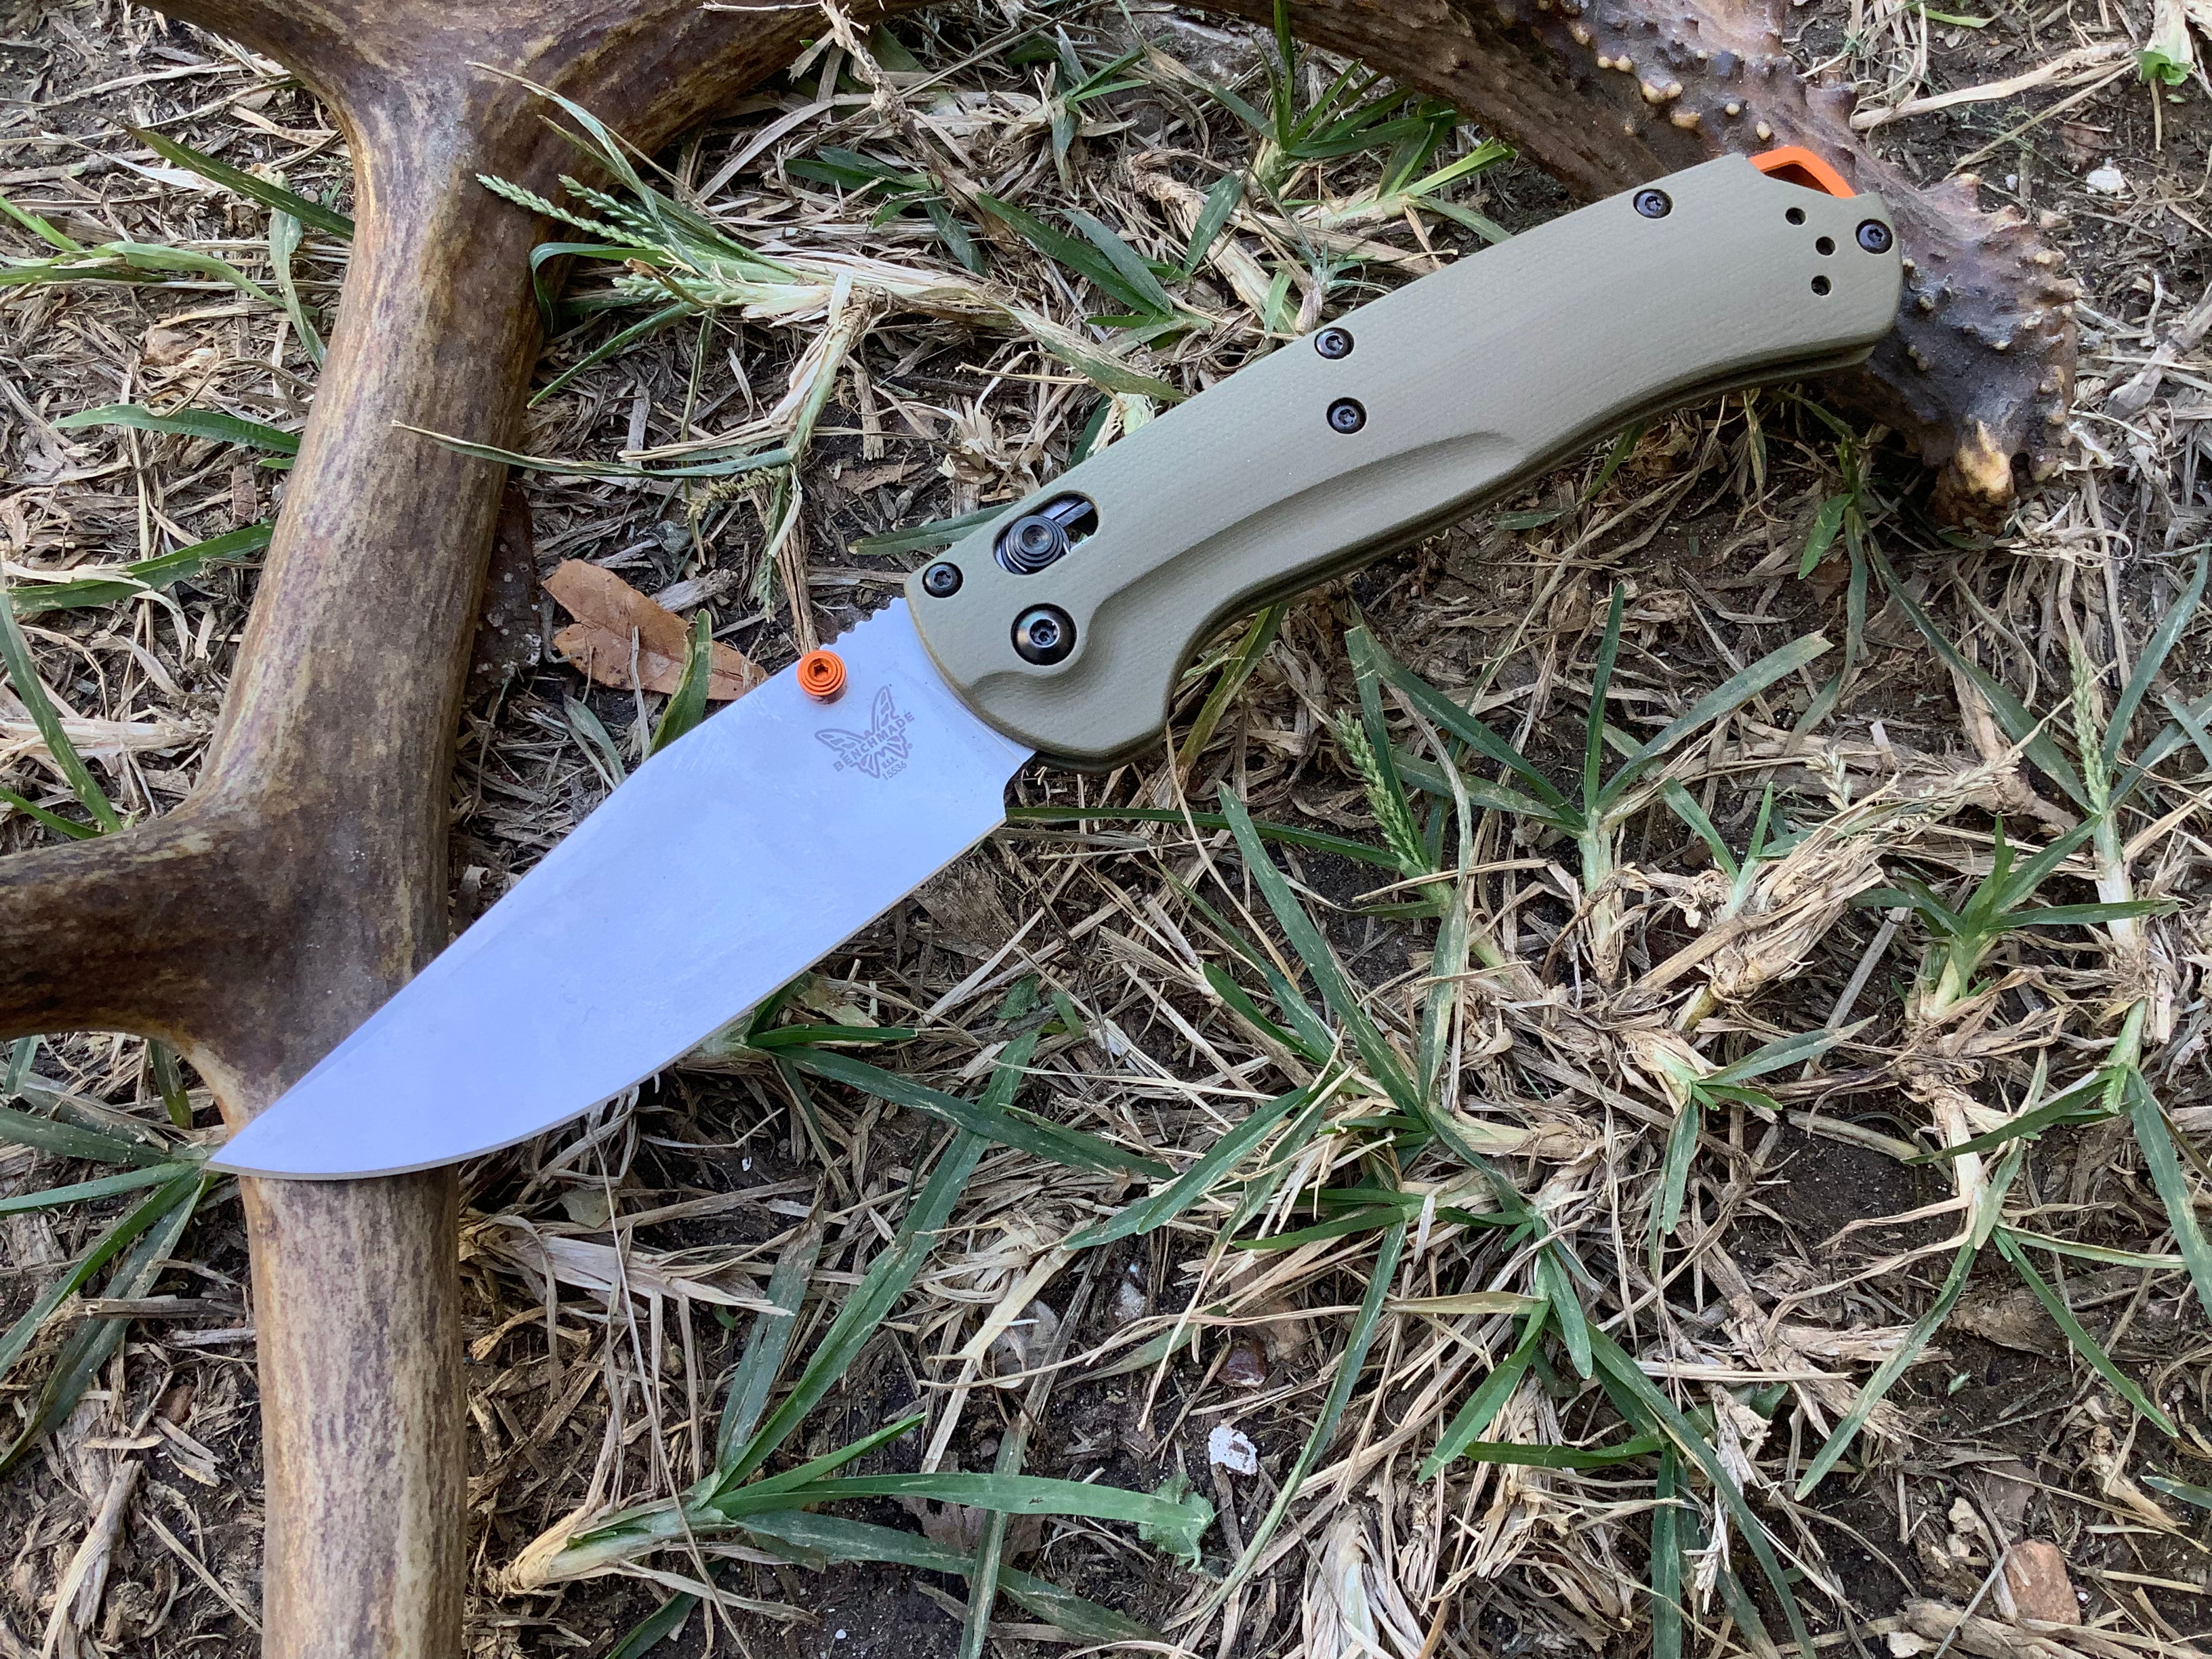 Taggedout Upgraded Version CPM S45VN OD Green G-10